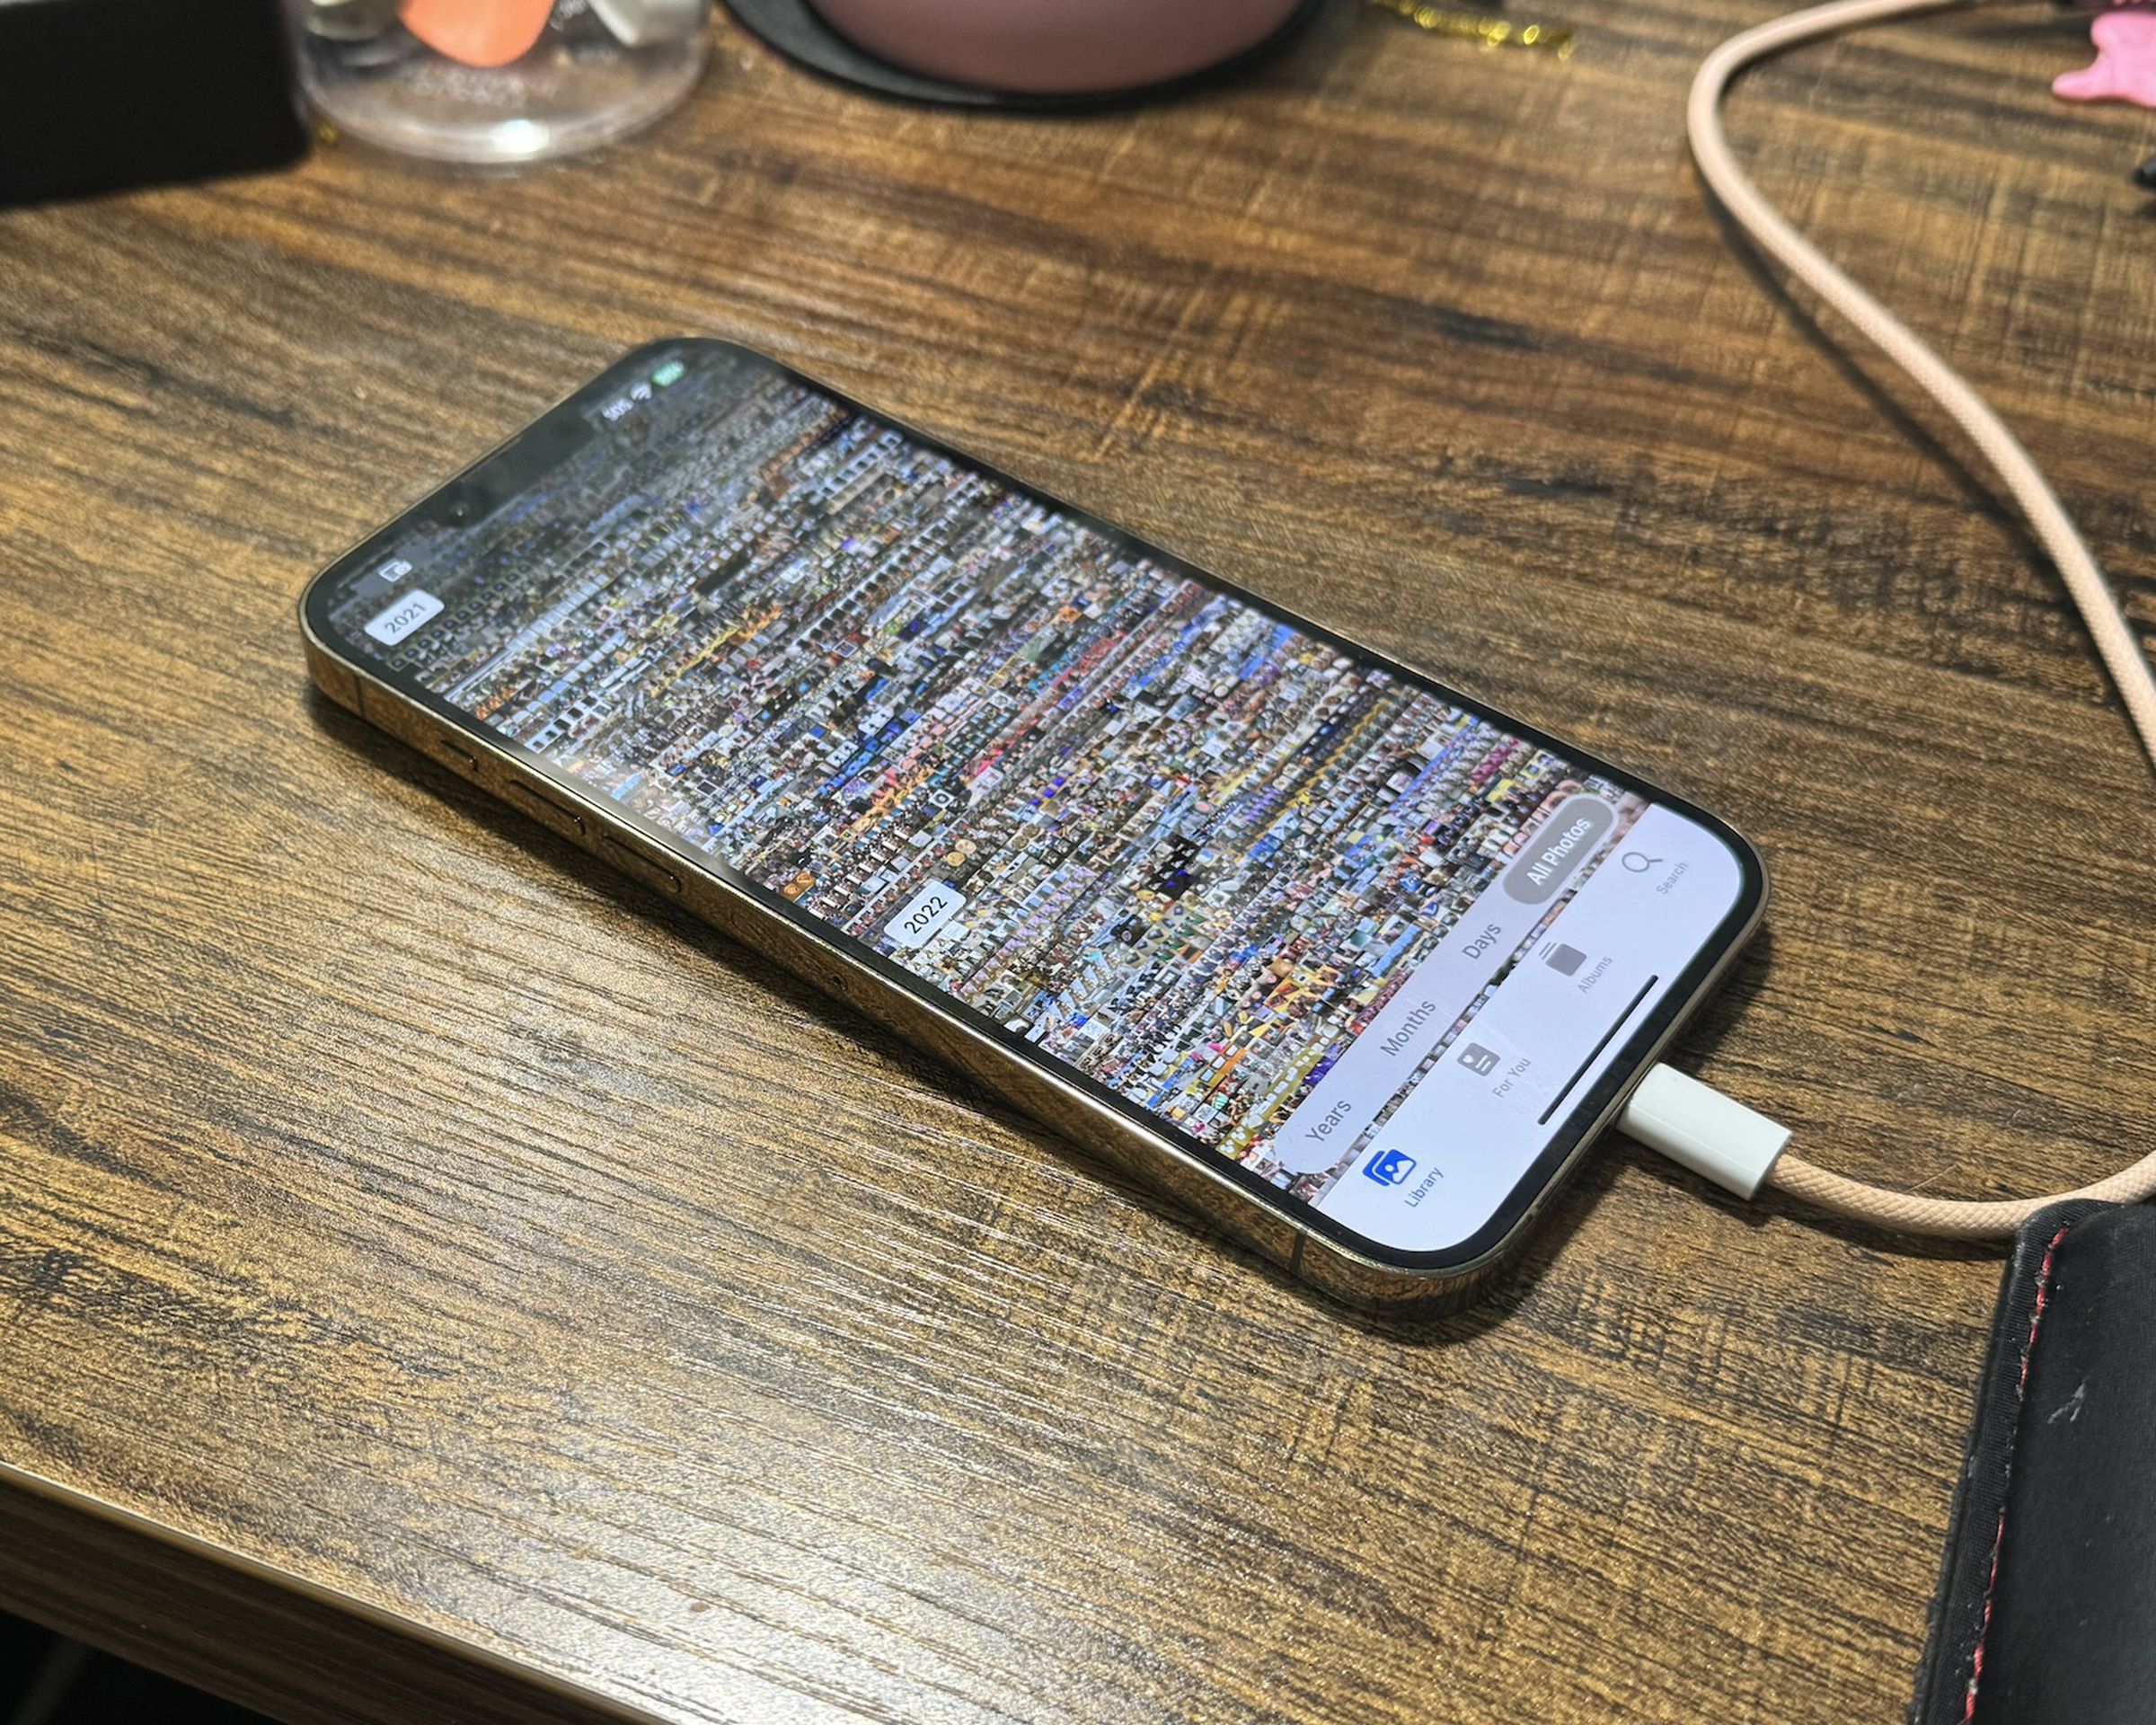 A picture of an iPhone with the iOS Photos app on-screen.